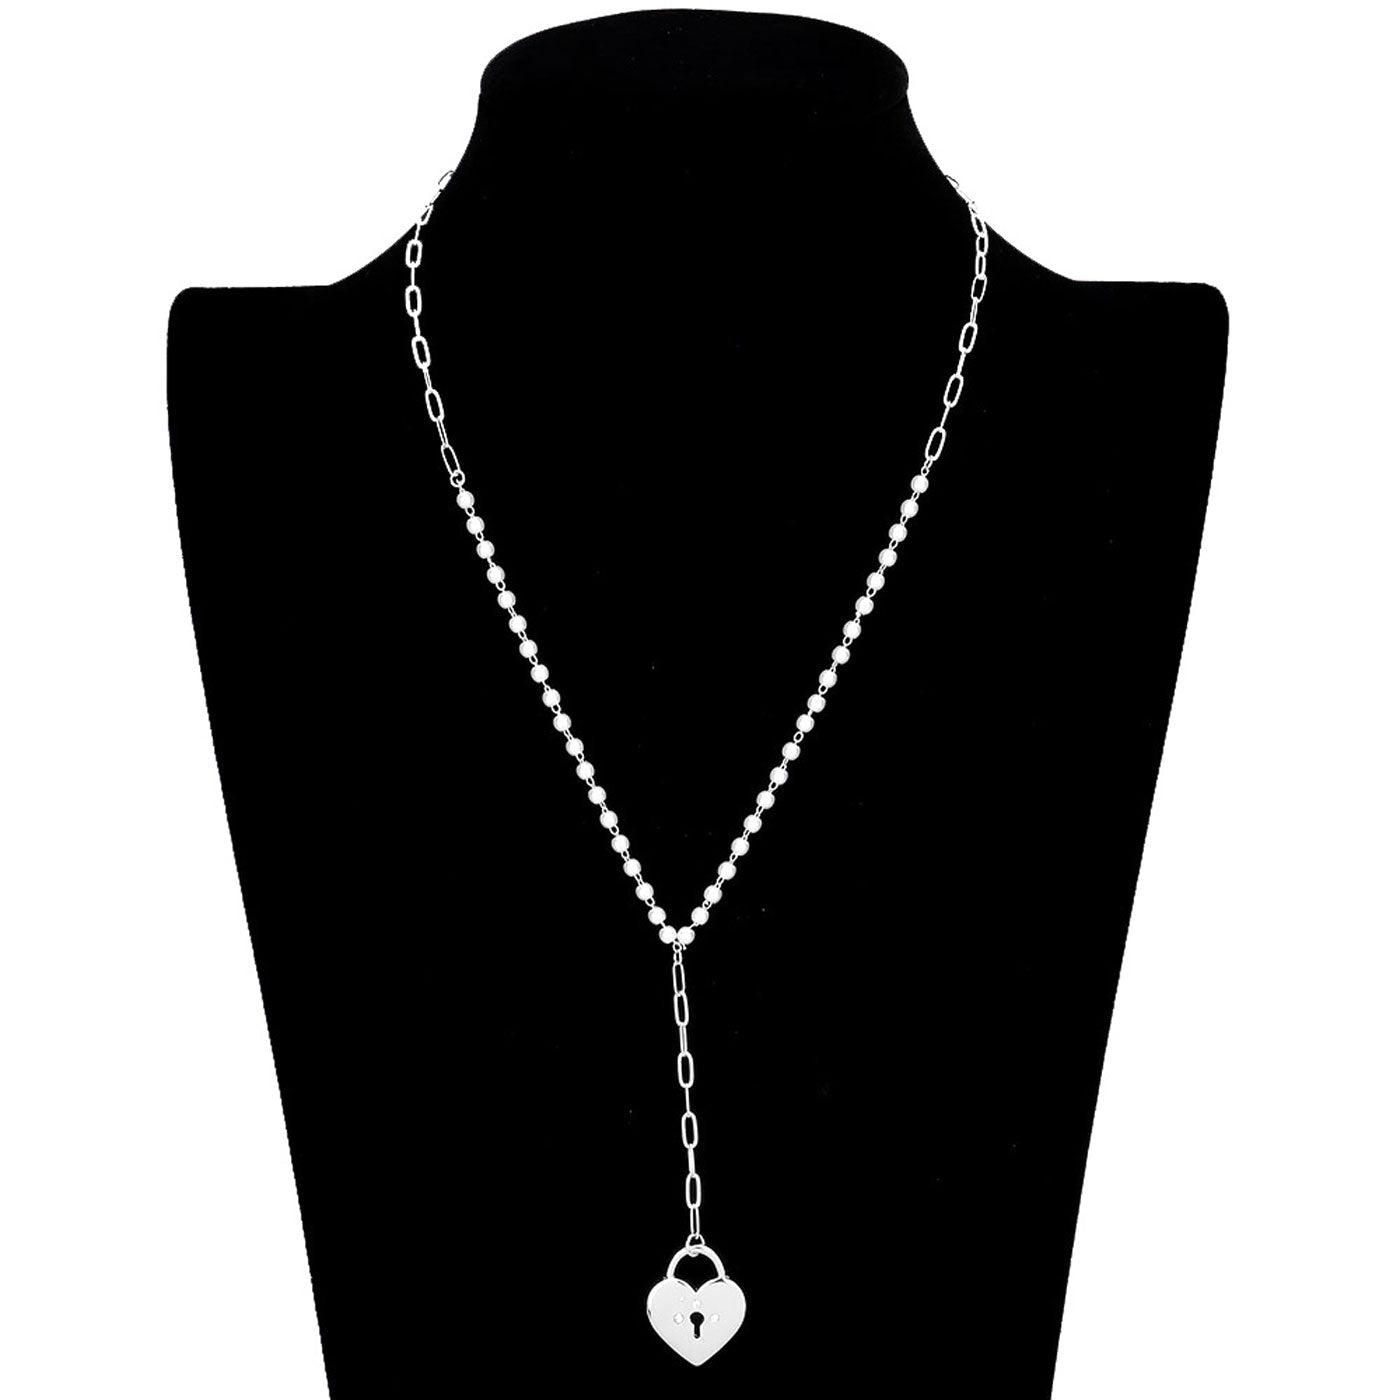 Silver Rhinestone Embellished Metal Heart Lock Pendant Y Necklace. Beautifully crafted design adds a gorgeous glow to any outfit. Jewelry that fits your lifestyle! Perfect Birthday Gift, Anniversary Gift, Mother's Day Gift, Graduation Gift, Prom Jewelry, Just Because Gift, Thank you Gift, Valentine's Day Gift.